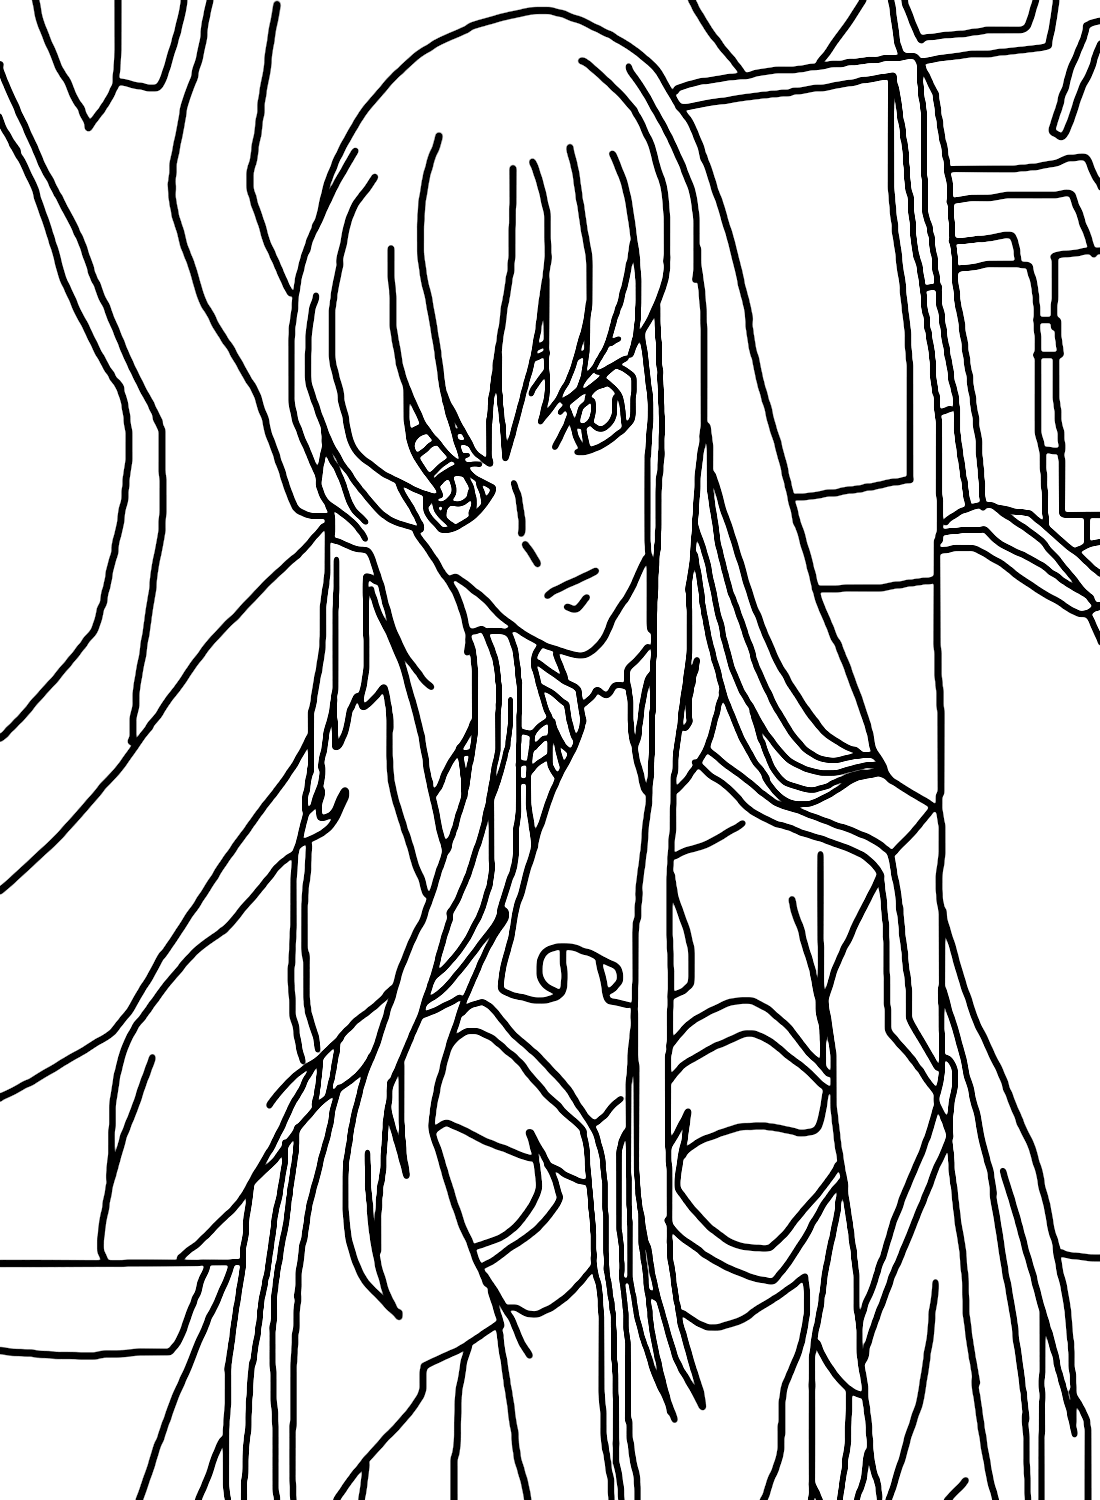 Printable C.C. Code Geass Coloring Page from C.C. Code Geass